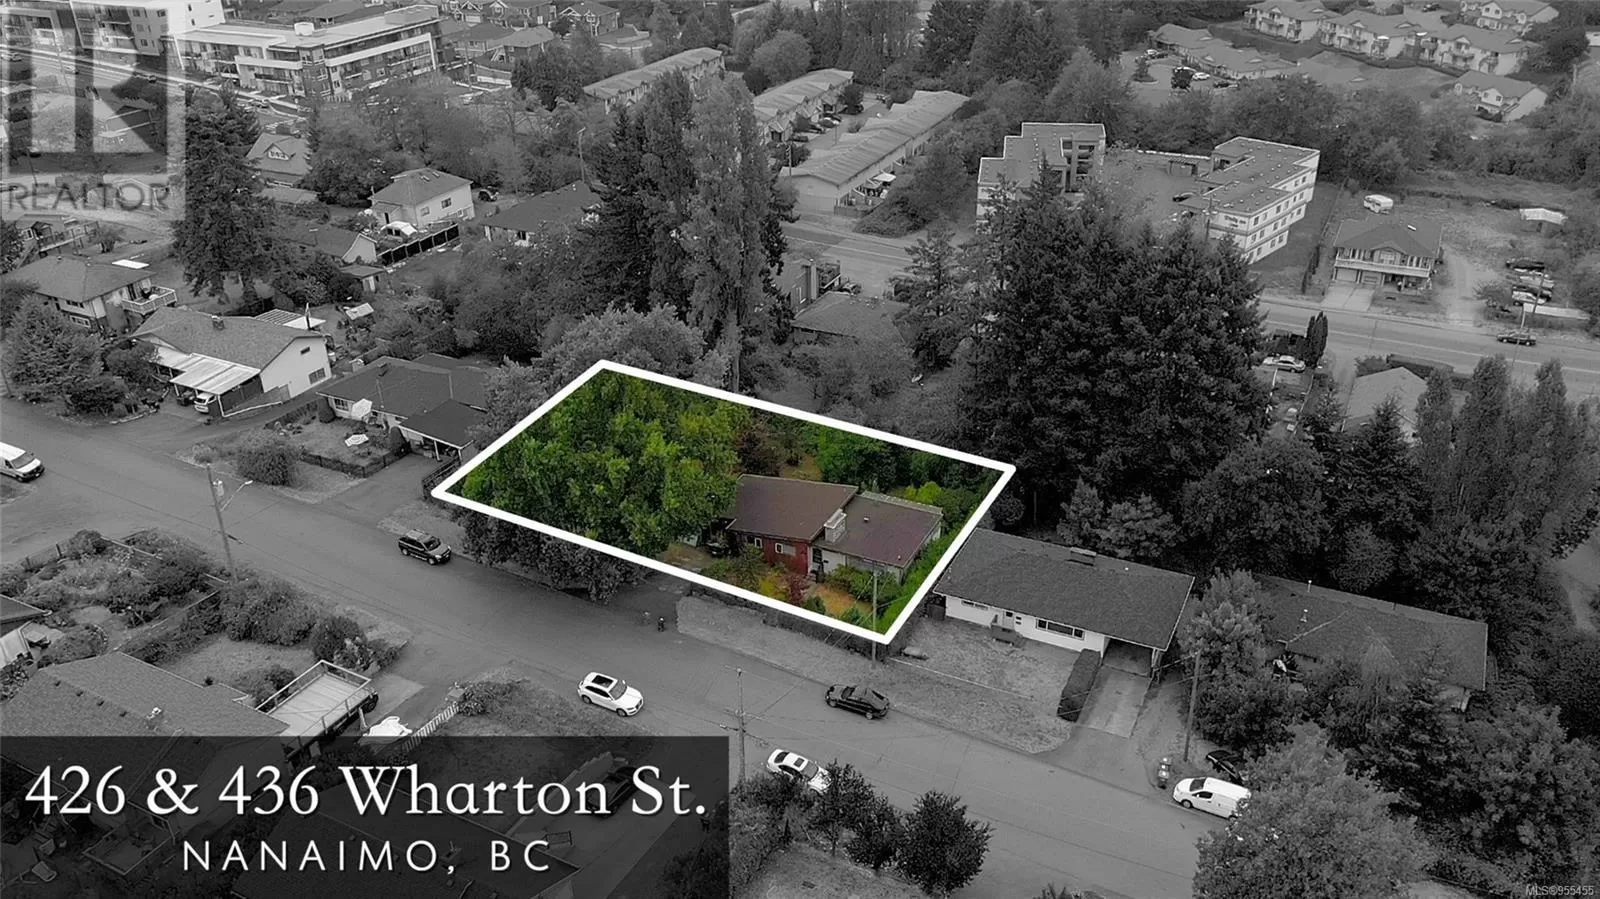 Commercial Mix for rent: 426/436 Wharton St, Nanaimo, British Columbia V9R 1W4